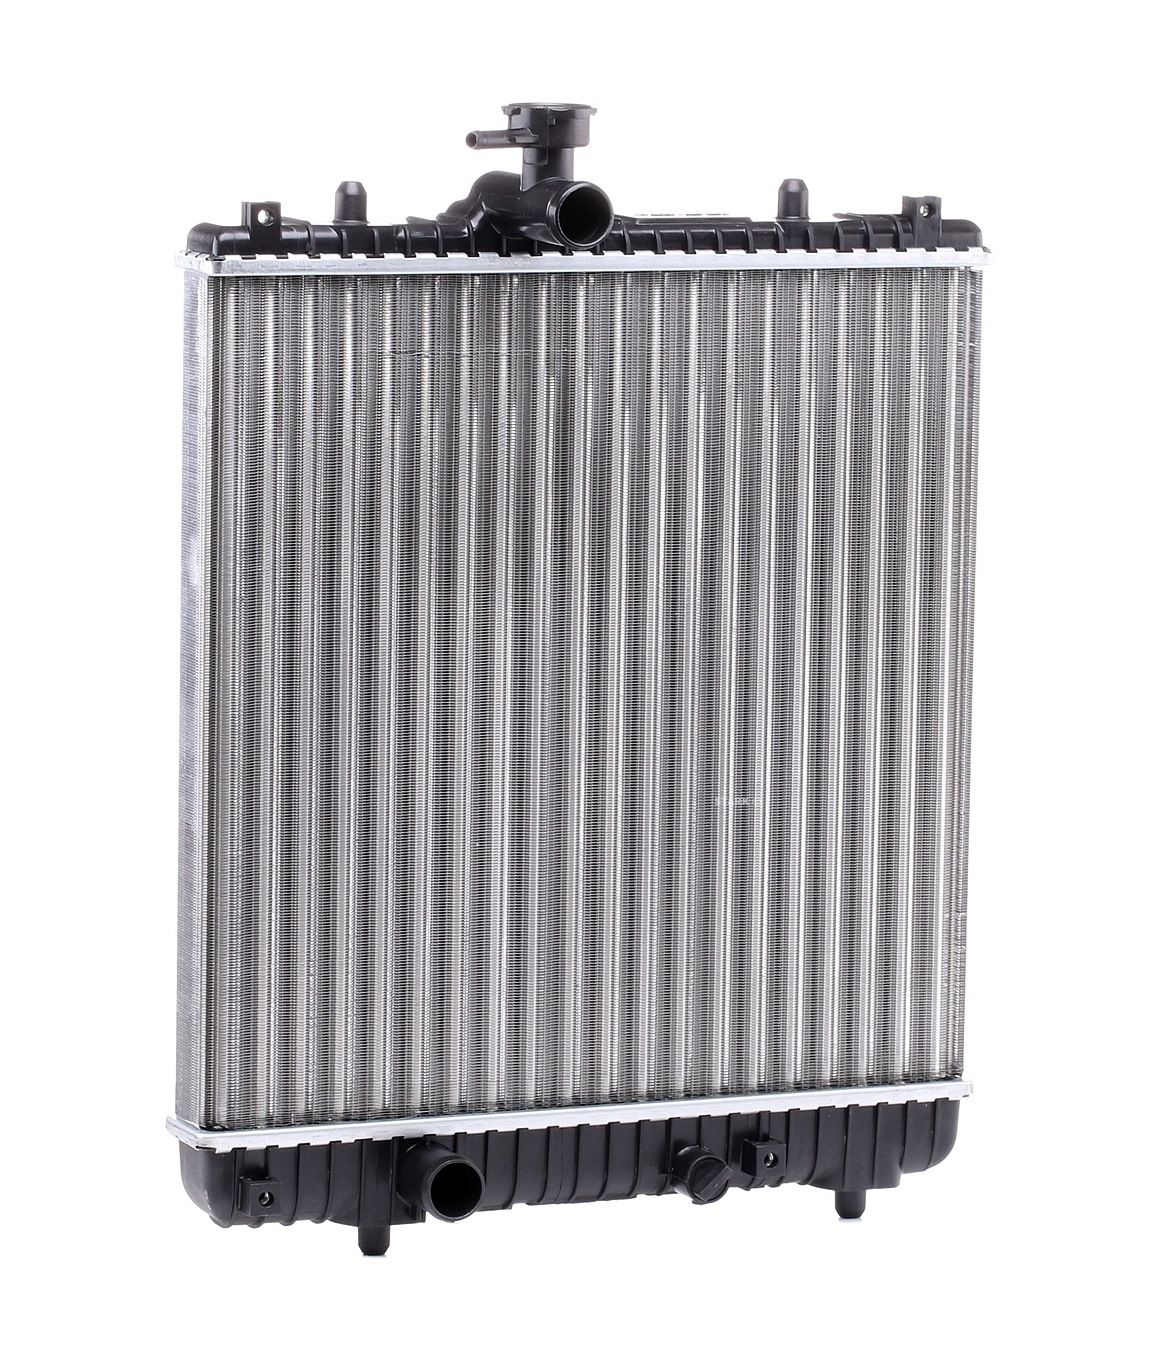 STARK Aluminium, Mechanically jointed cooling fins Core Dimensions: 378 x 377 x 34 mm Radiator SKRD-0120349 buy